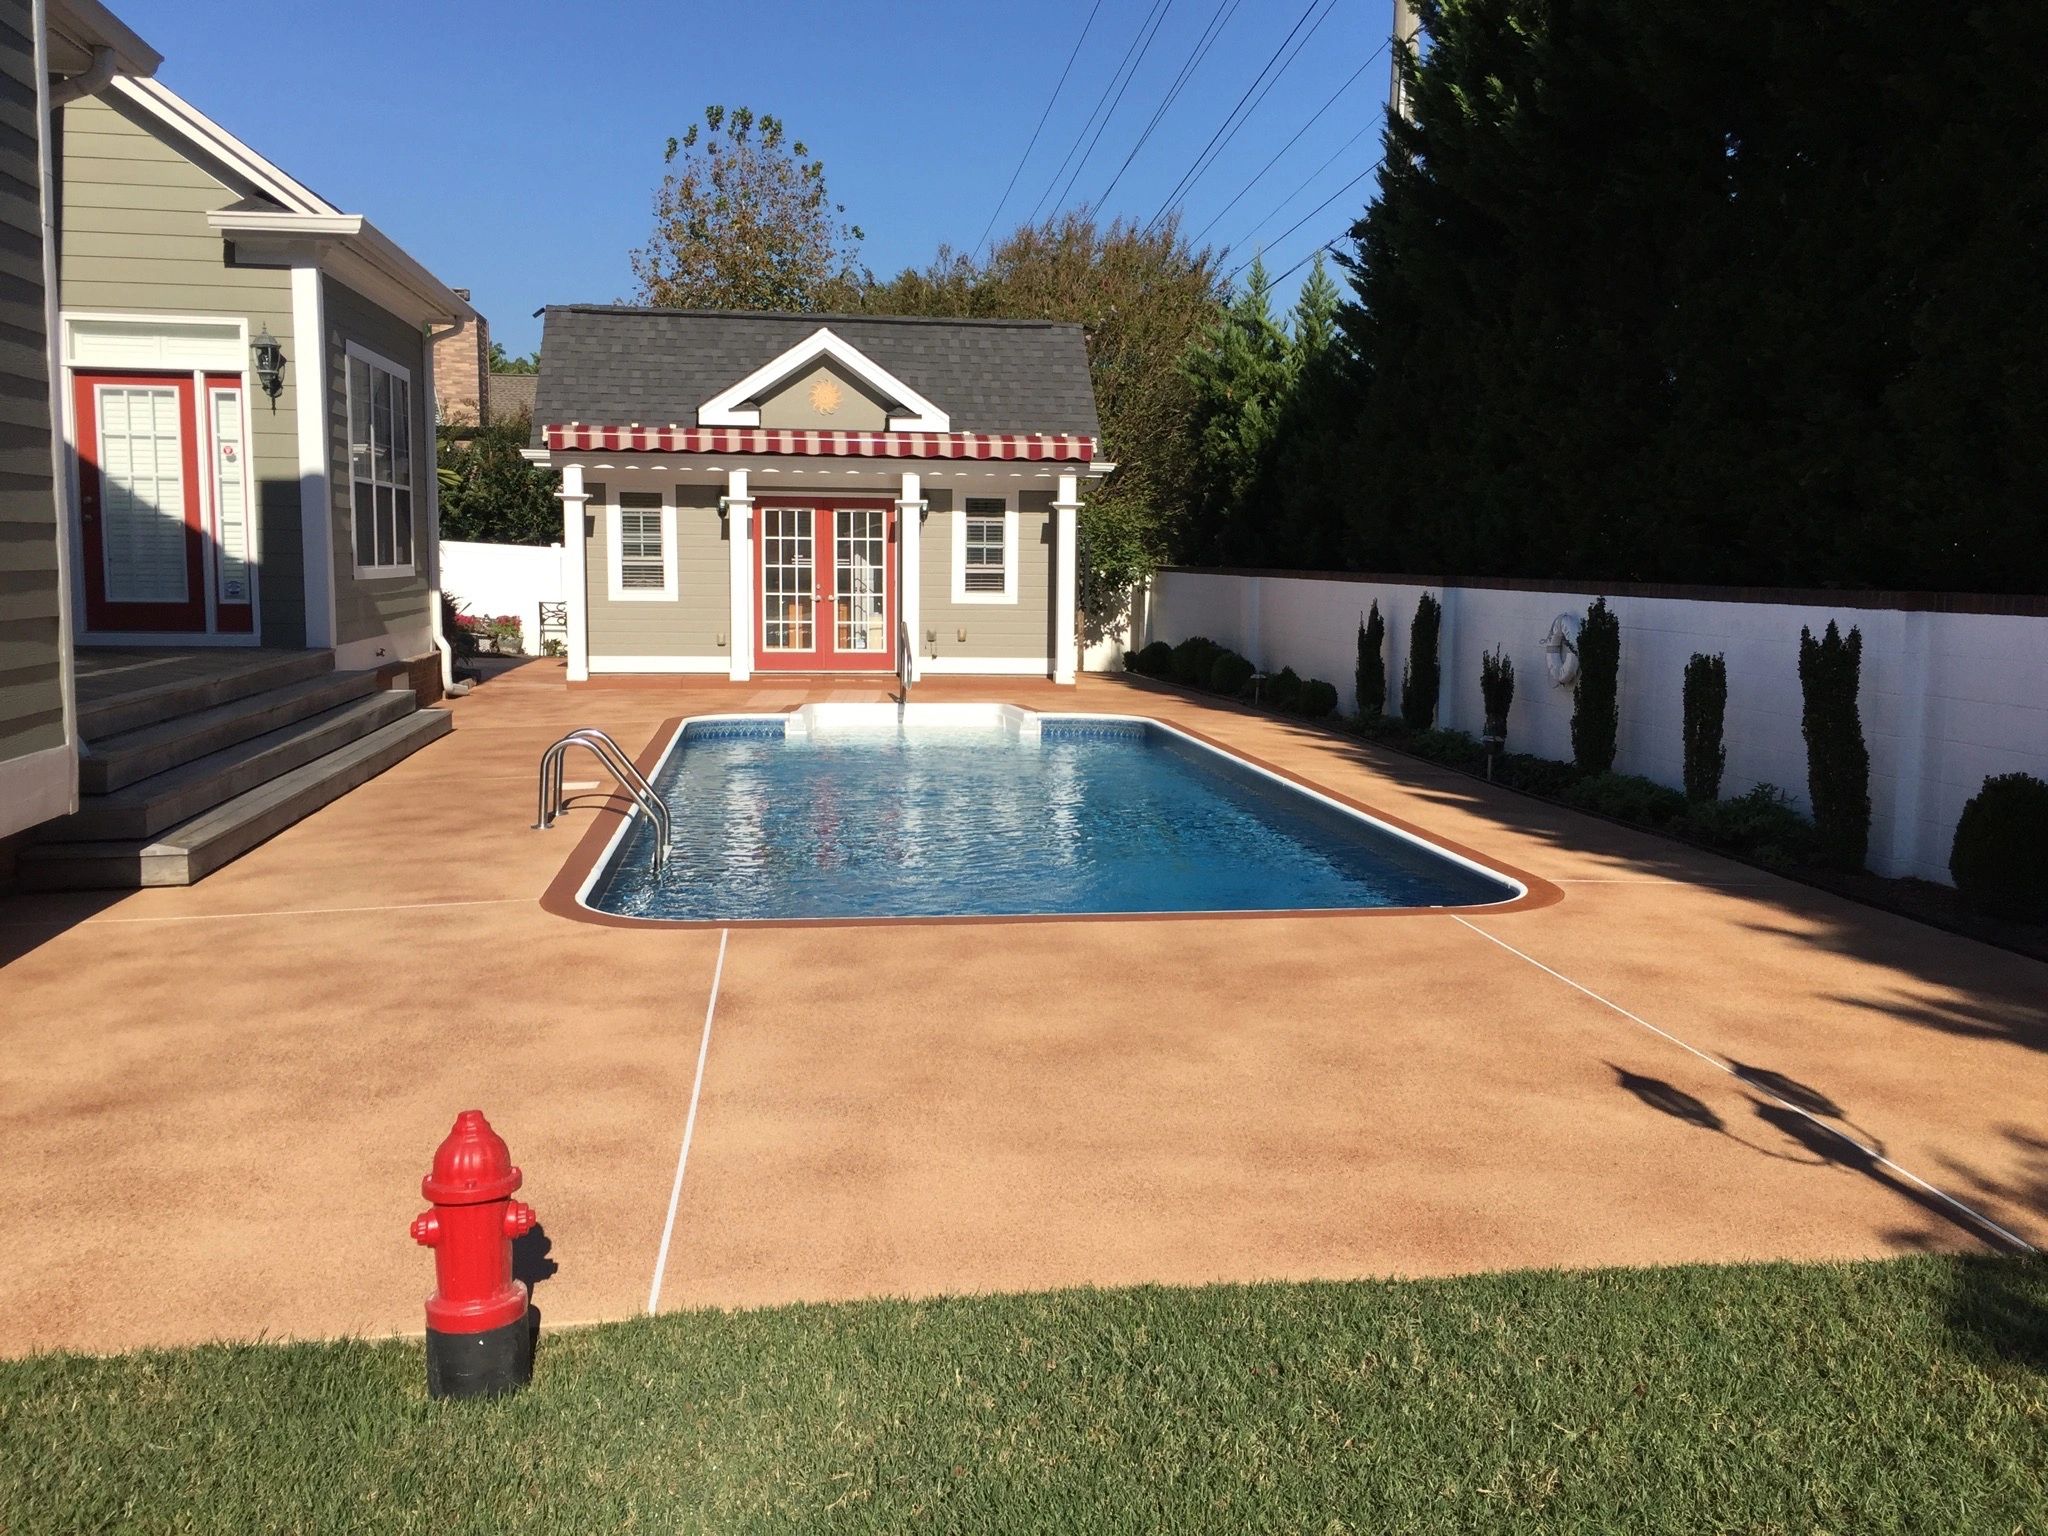 Pool Deck with Waterproofing System